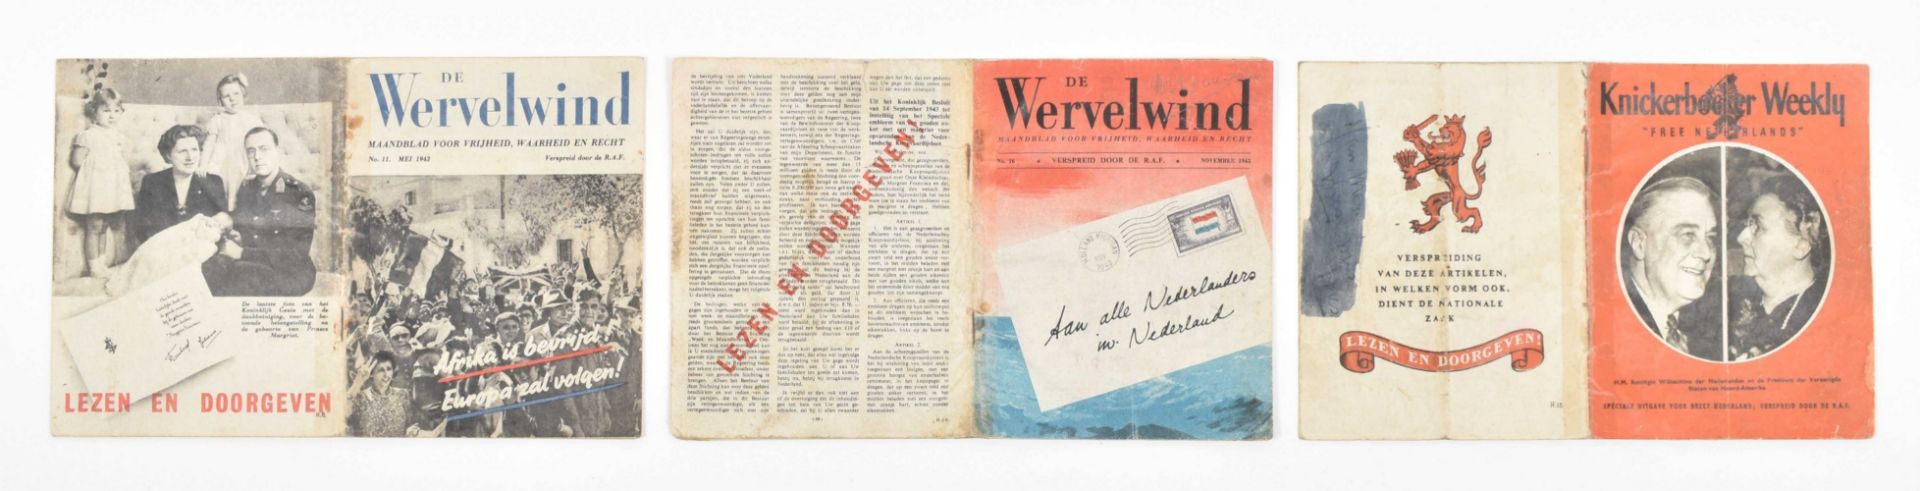 Collection of approx. 100 newspapers, periodicals, etc. publ. 1940-1945 - Image 5 of 9